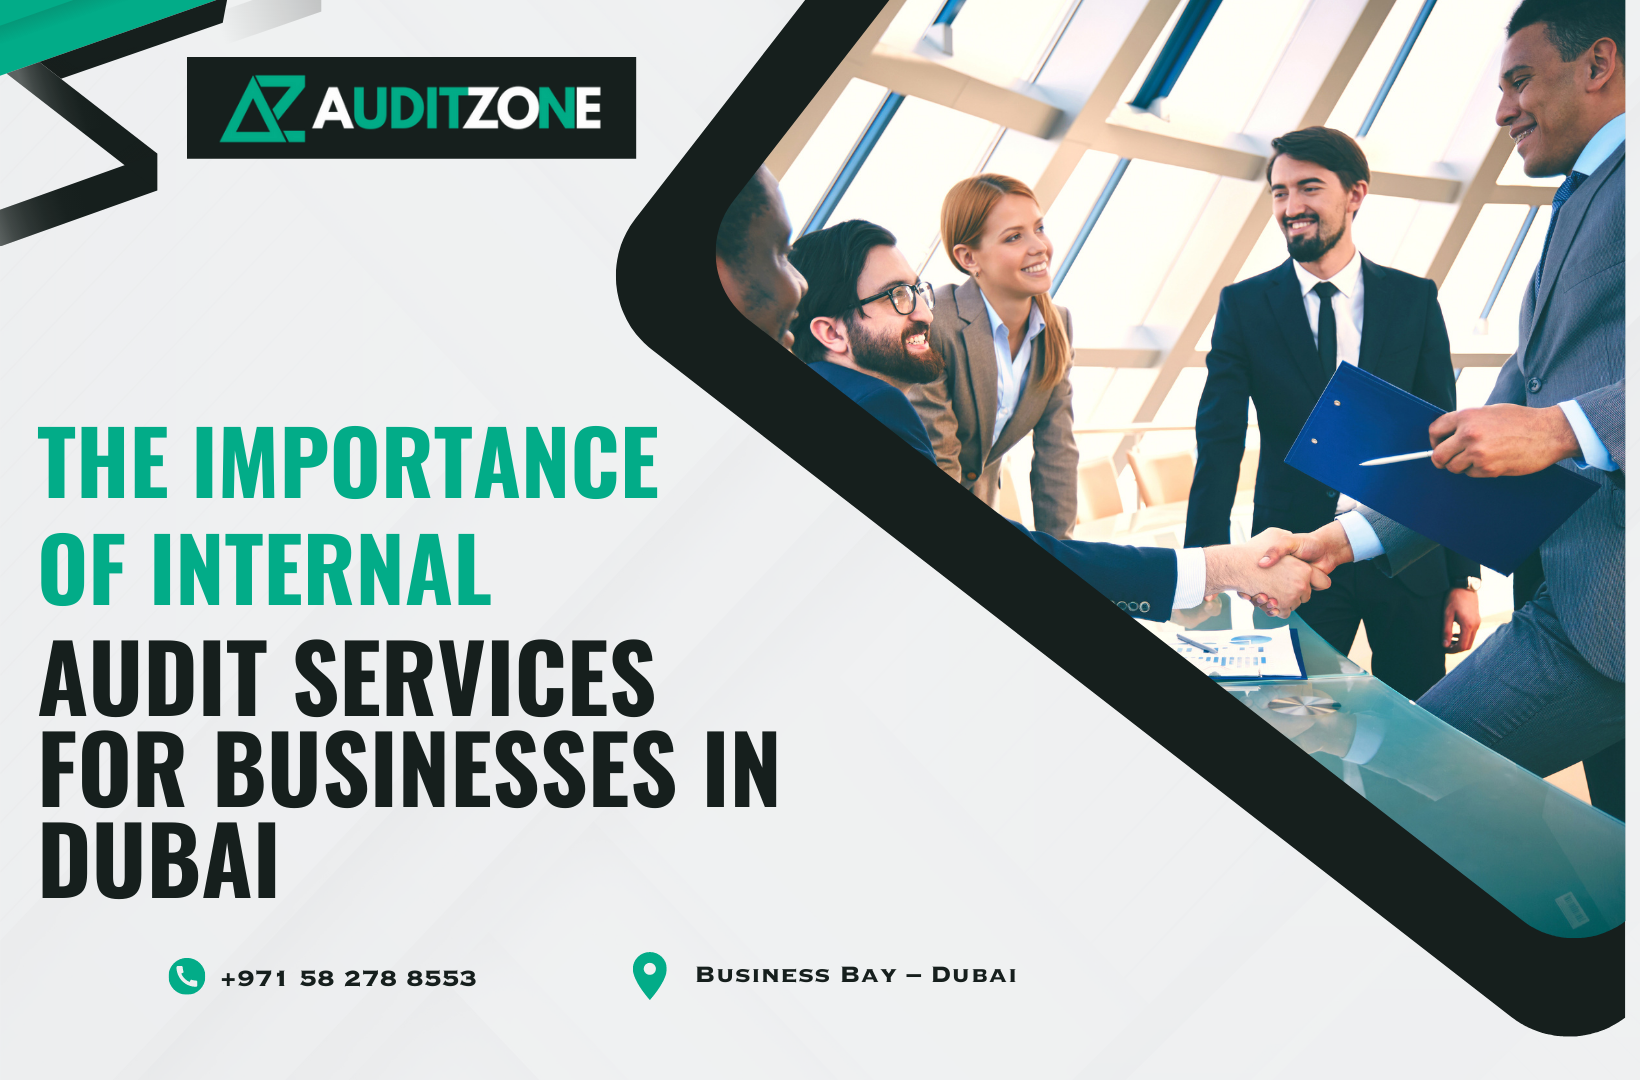 The Importance of Internal Audit Services for Businesses in Dubai